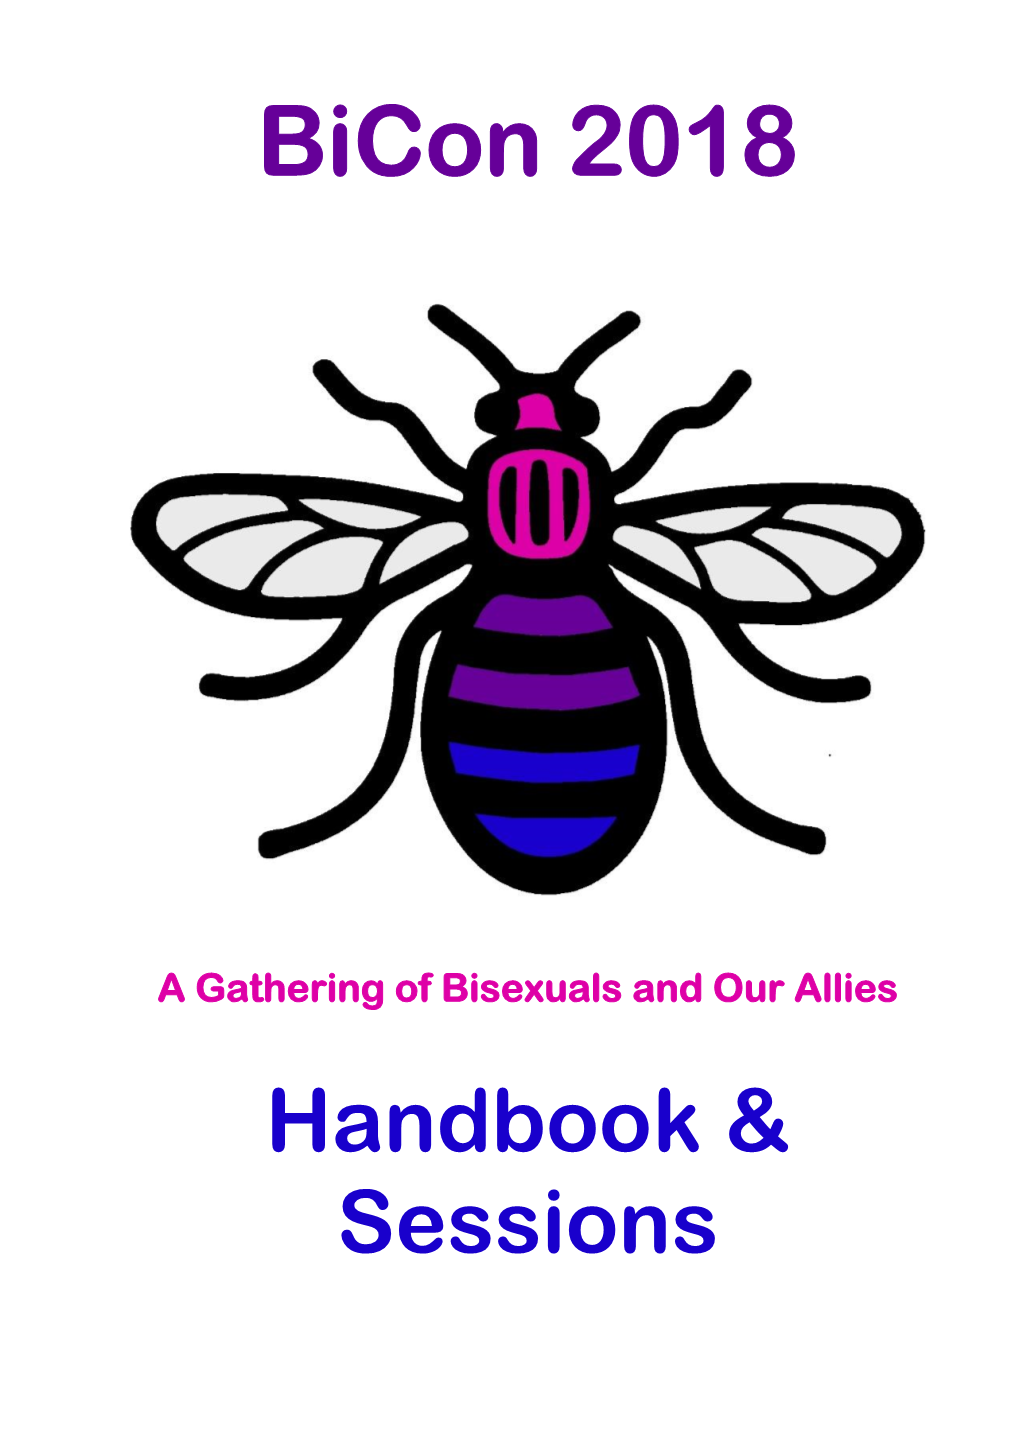 To Download a Pdf of the Handbook with Session